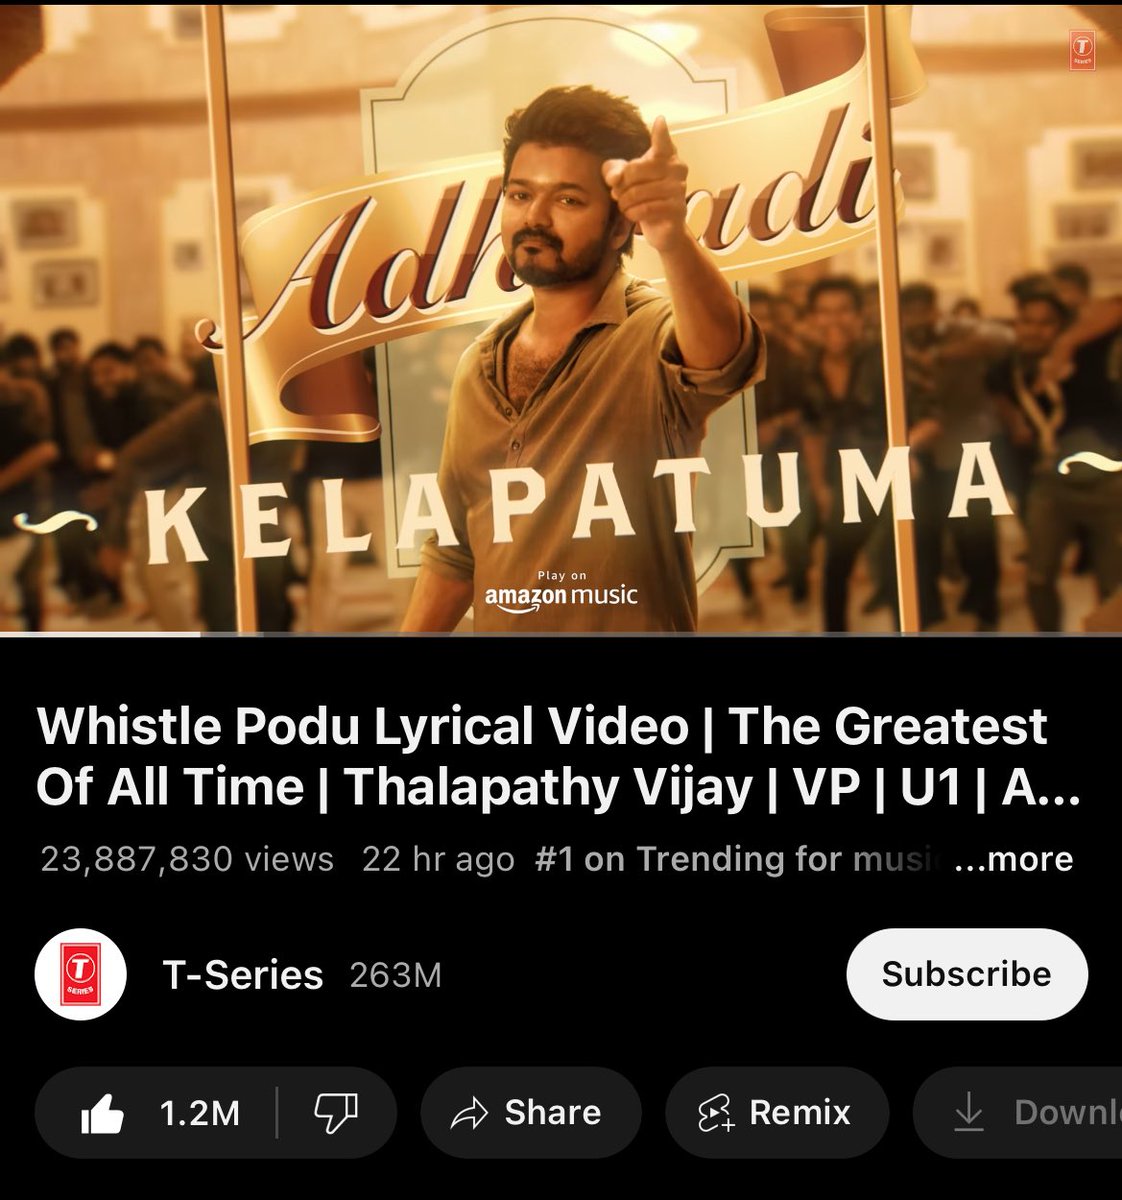 #WhistlePodu Now Becomes The Most Viewed South Indian Lyrical Song in 24 Hours Beating Arabic Kuthu 23.7M Irrespective of the Music director’s , The Brand Vijay Is Main Attraction 🔥